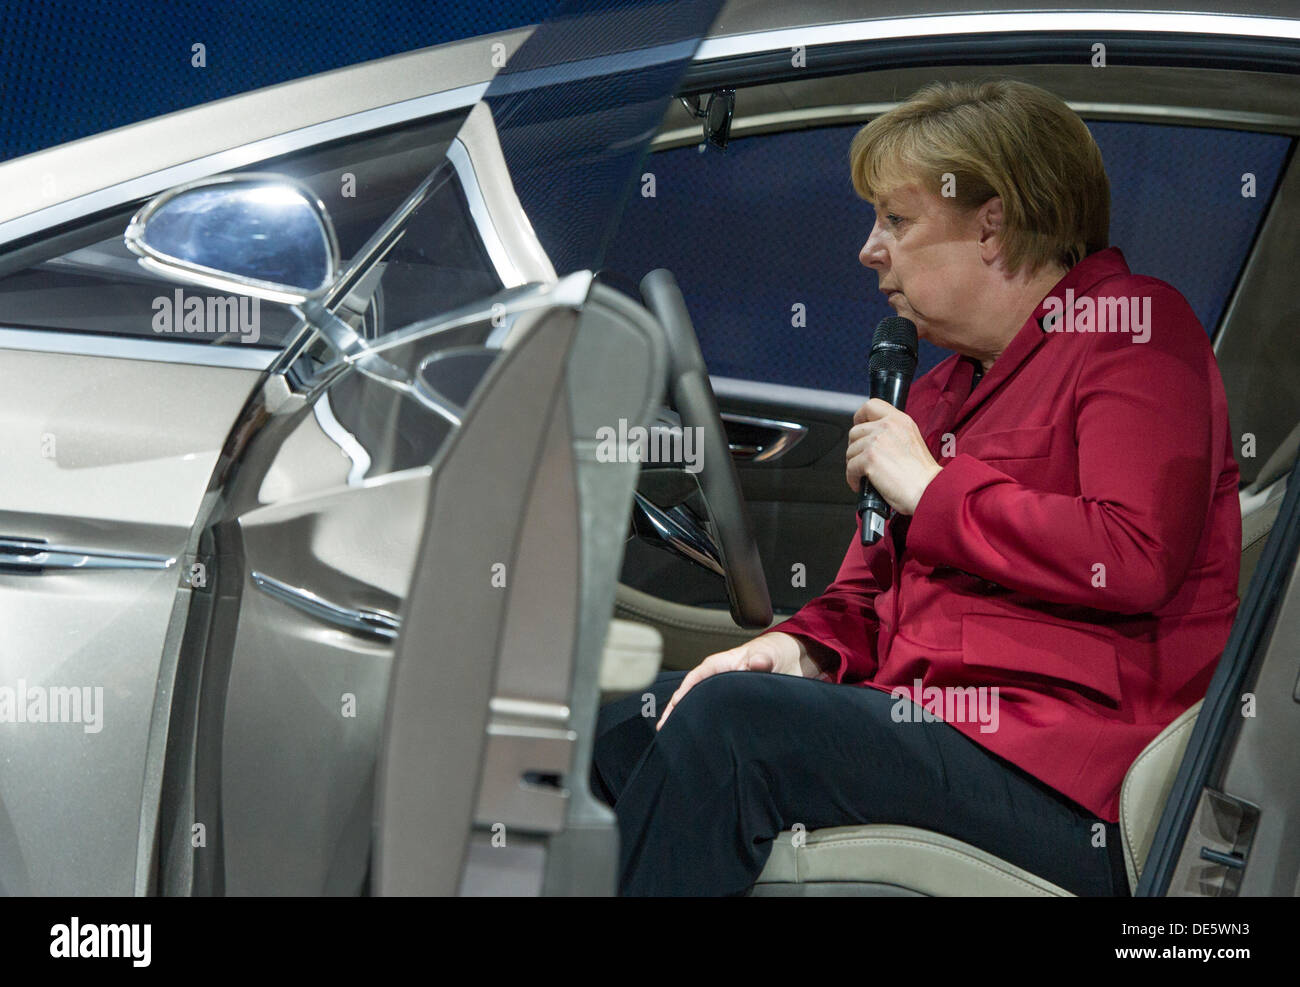 Frankfurt Main, Germany. 12th Sep, 2013. German Chancellor Angela Merkel gets into a S-Max Concept of car manufacturer Ford at the International Motor Show (IAA) in Frankfurt Main, Germany, 12 September 2013. Almost 1100 exhibitors from around the world present novelties at the world's largest automobile show IAA until 22 September 2013. Photo:UWE ANSPACH/dpa/Alamy Live News Stock Photo